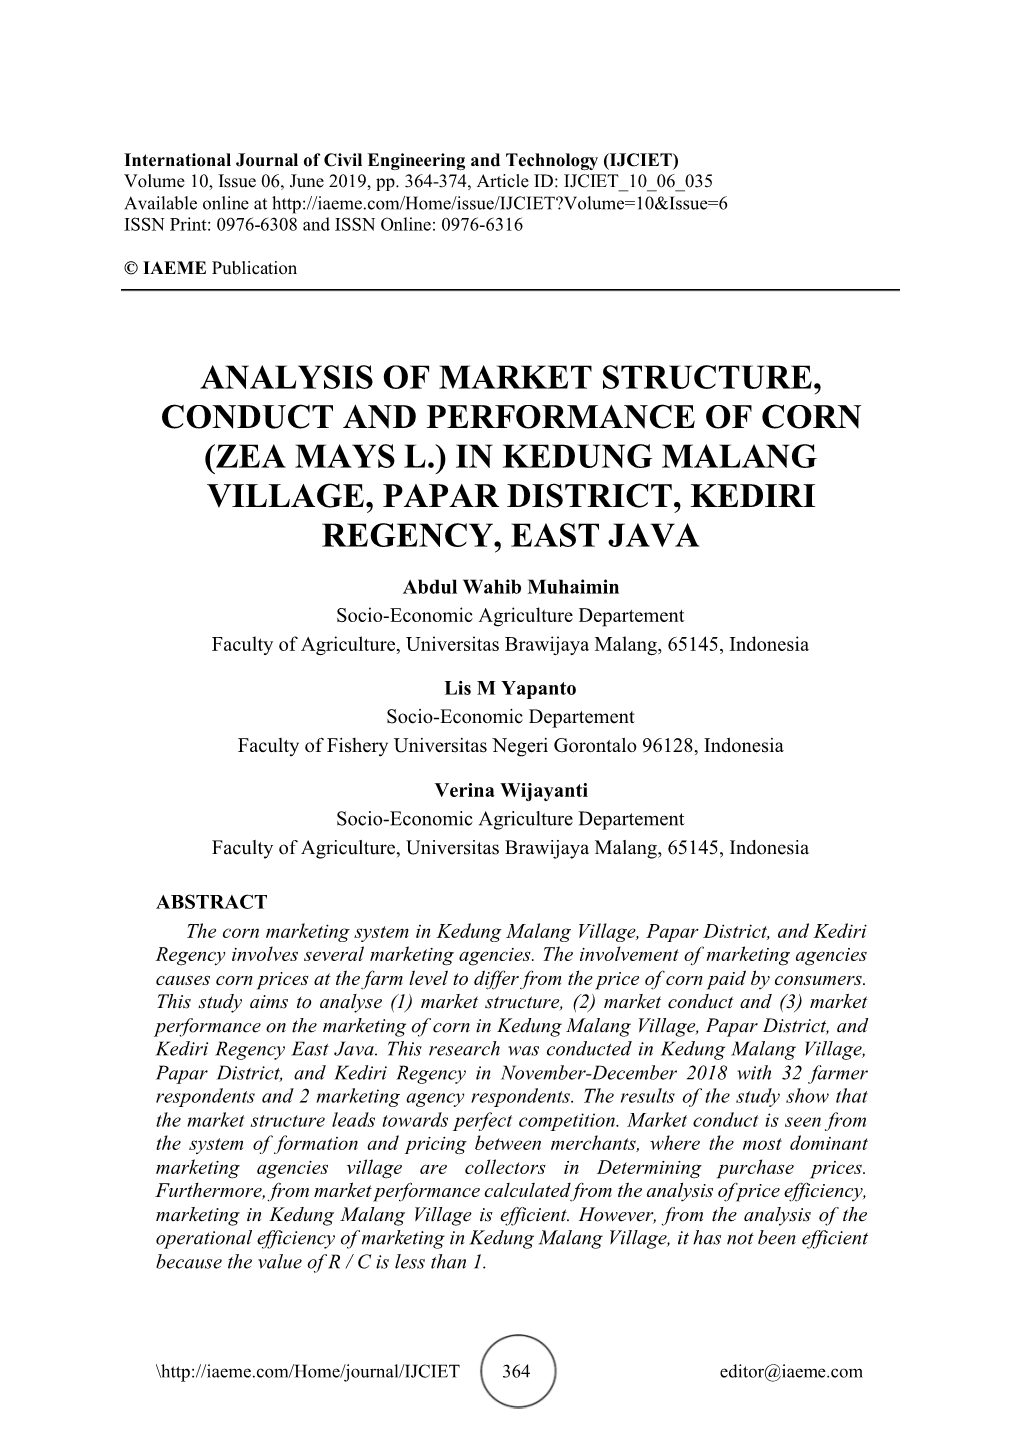 Analysis of Market Structure, Conduct and Performance of Corn (Zea Mays L.) in Kedung Malang Village, Papar District, Kediri Regency, East Java